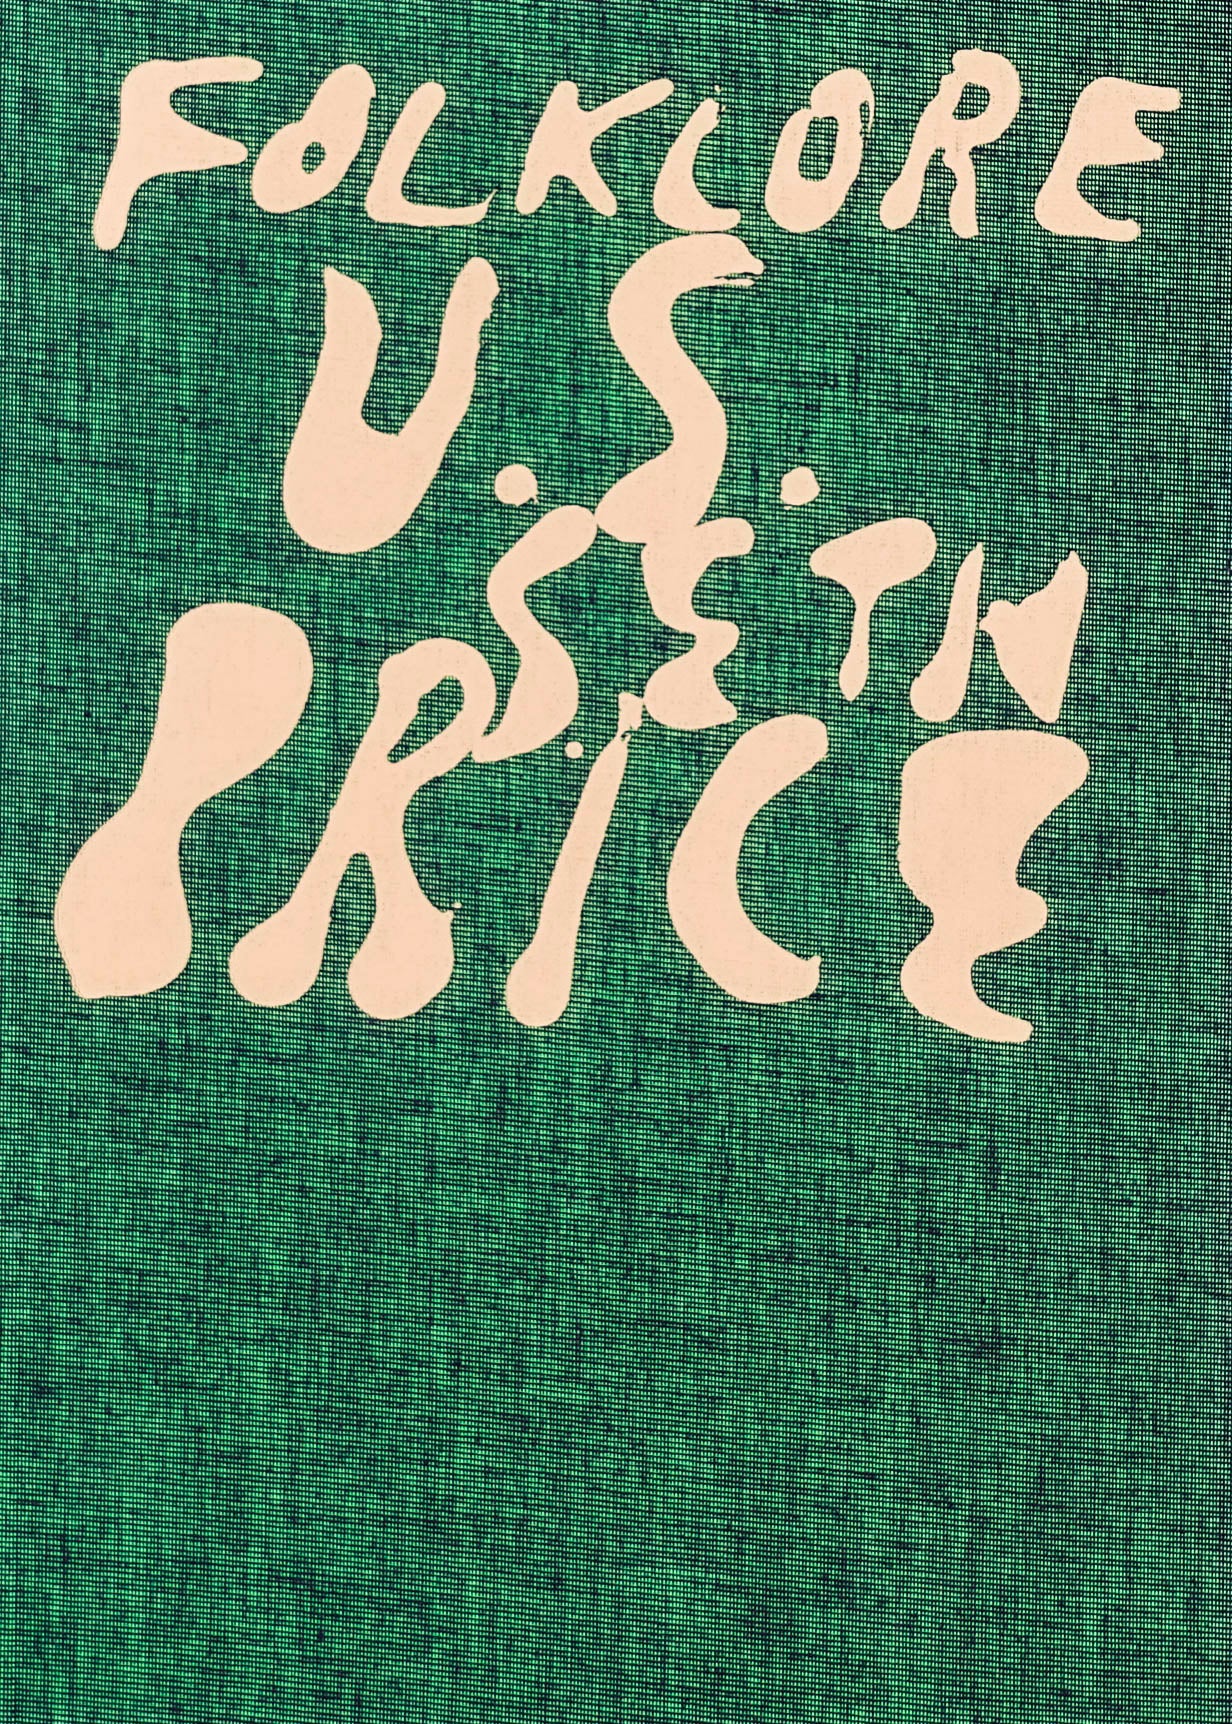 Textured green backdrop with painted text that reads Folklore U.S. Seth Price in an off-white color